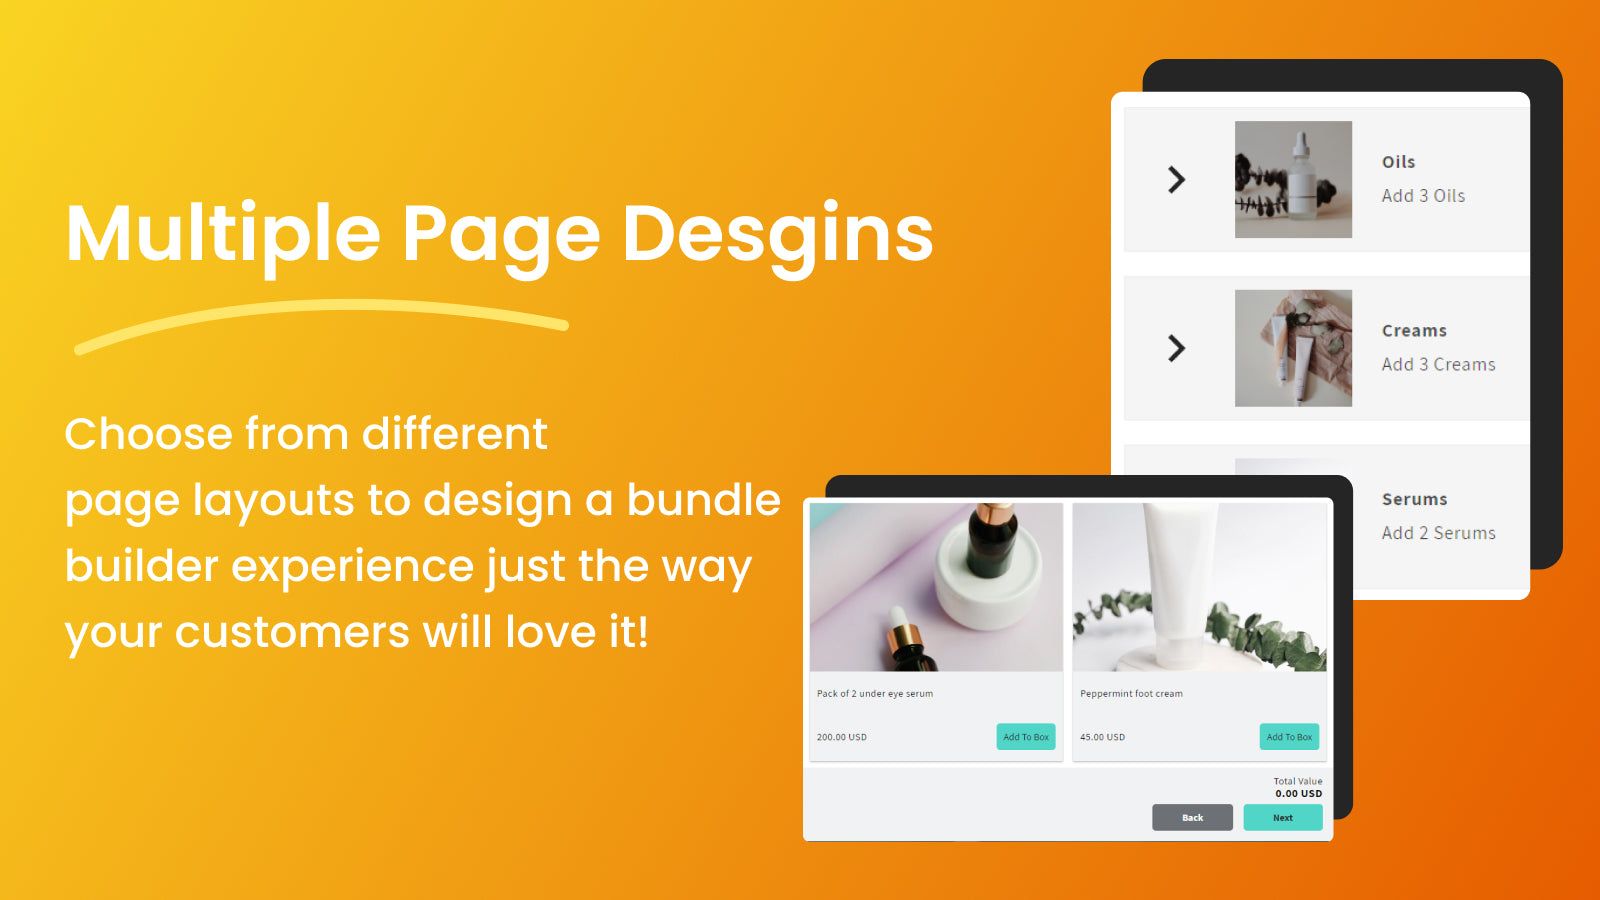 Multiple page designs